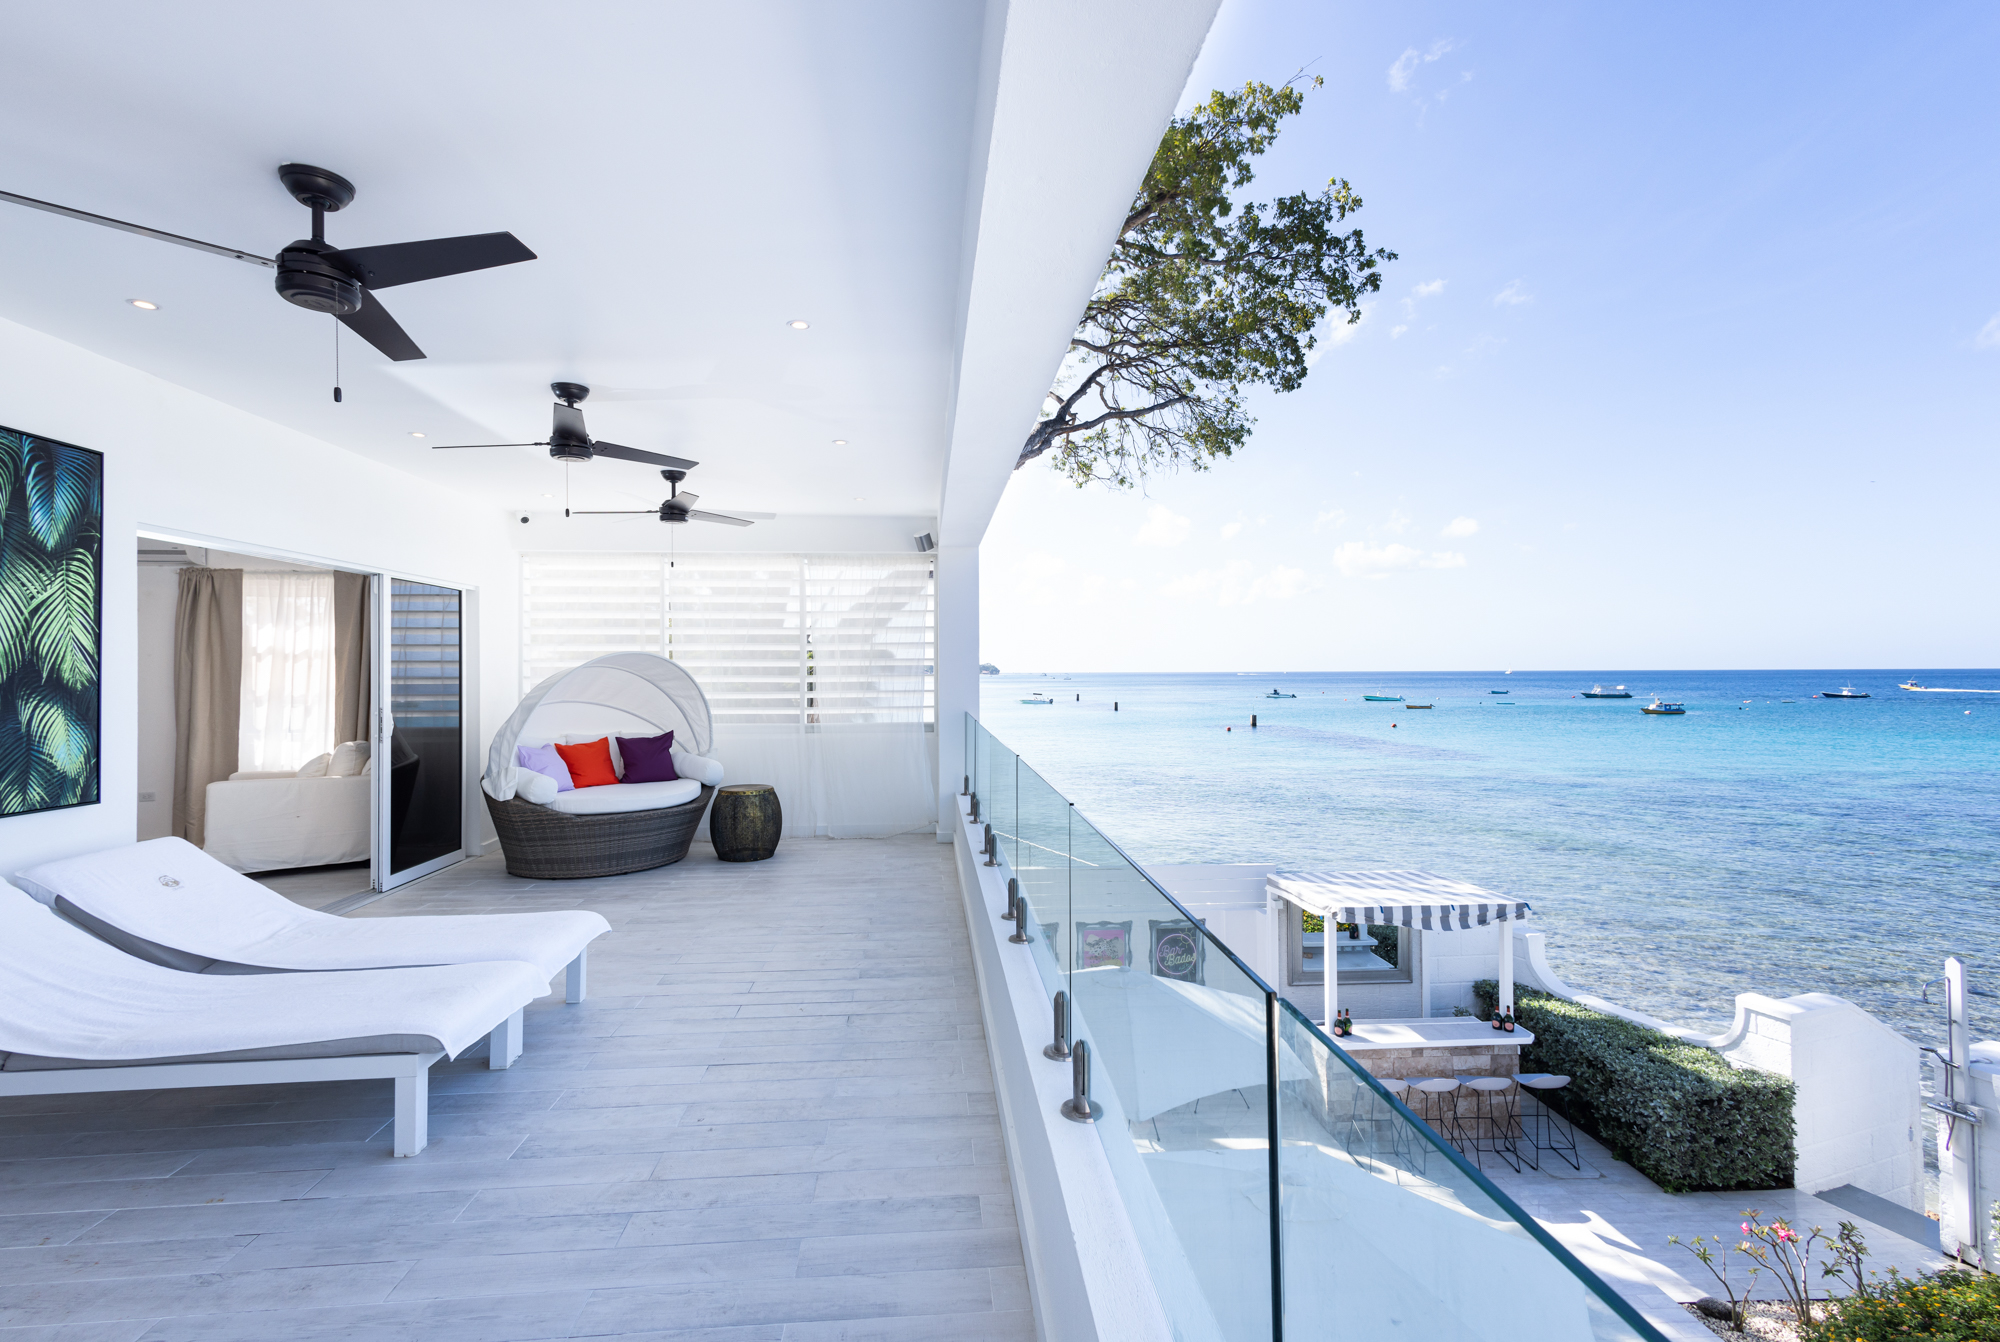 Barbados luxury modern beachfront villa view from master bedroom extensive terrace, to the gardens and Caribbean Sea views beyond